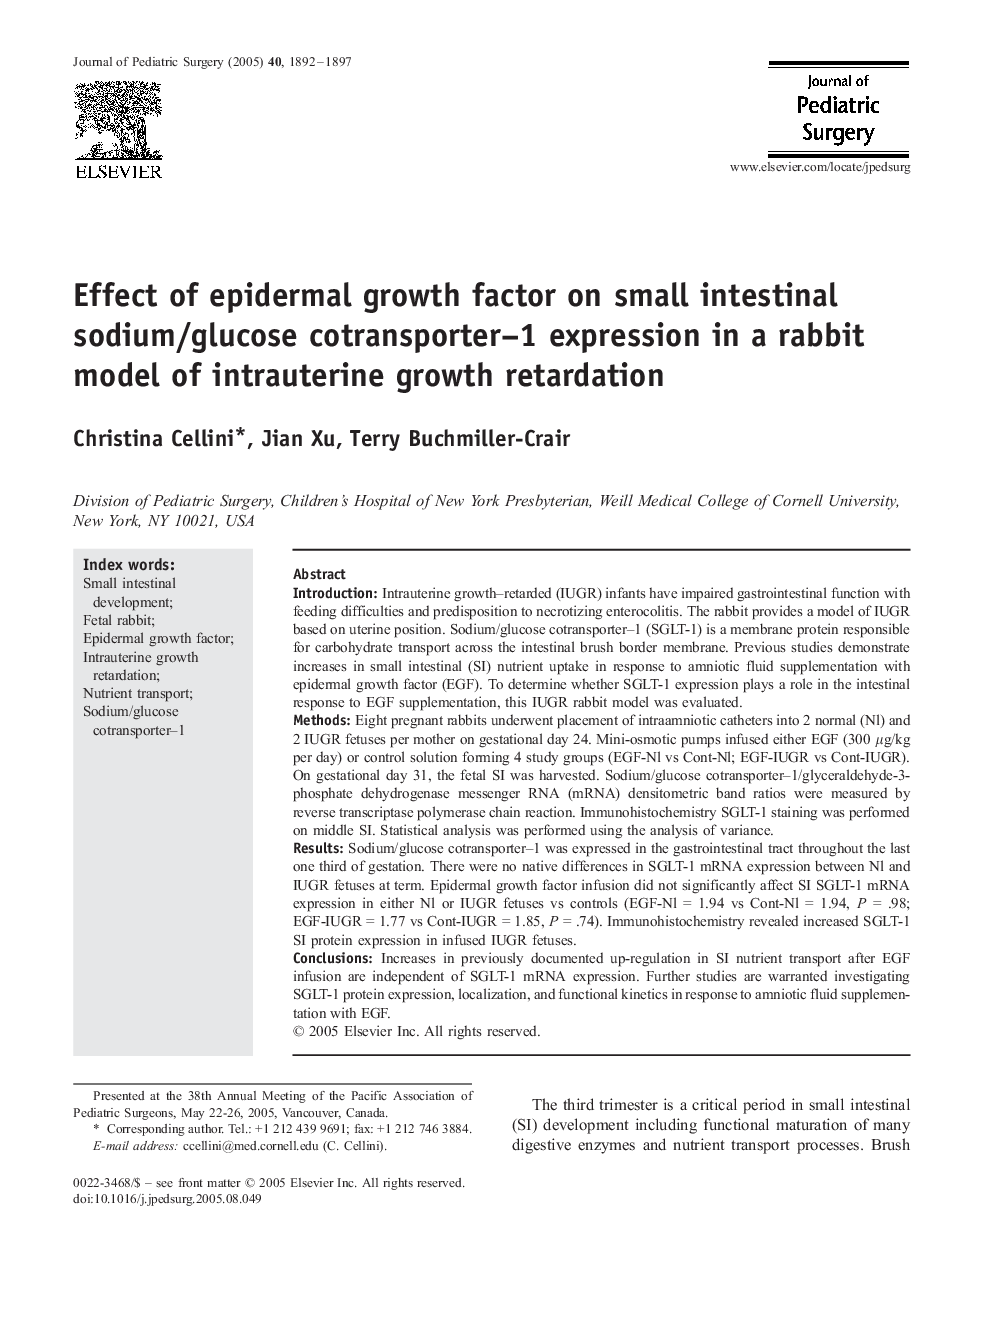 Effect of epidermal growth factor on small intestinal sodium/glucose cotransporter–1 expression in a rabbit model of intrauterine growth retardation 